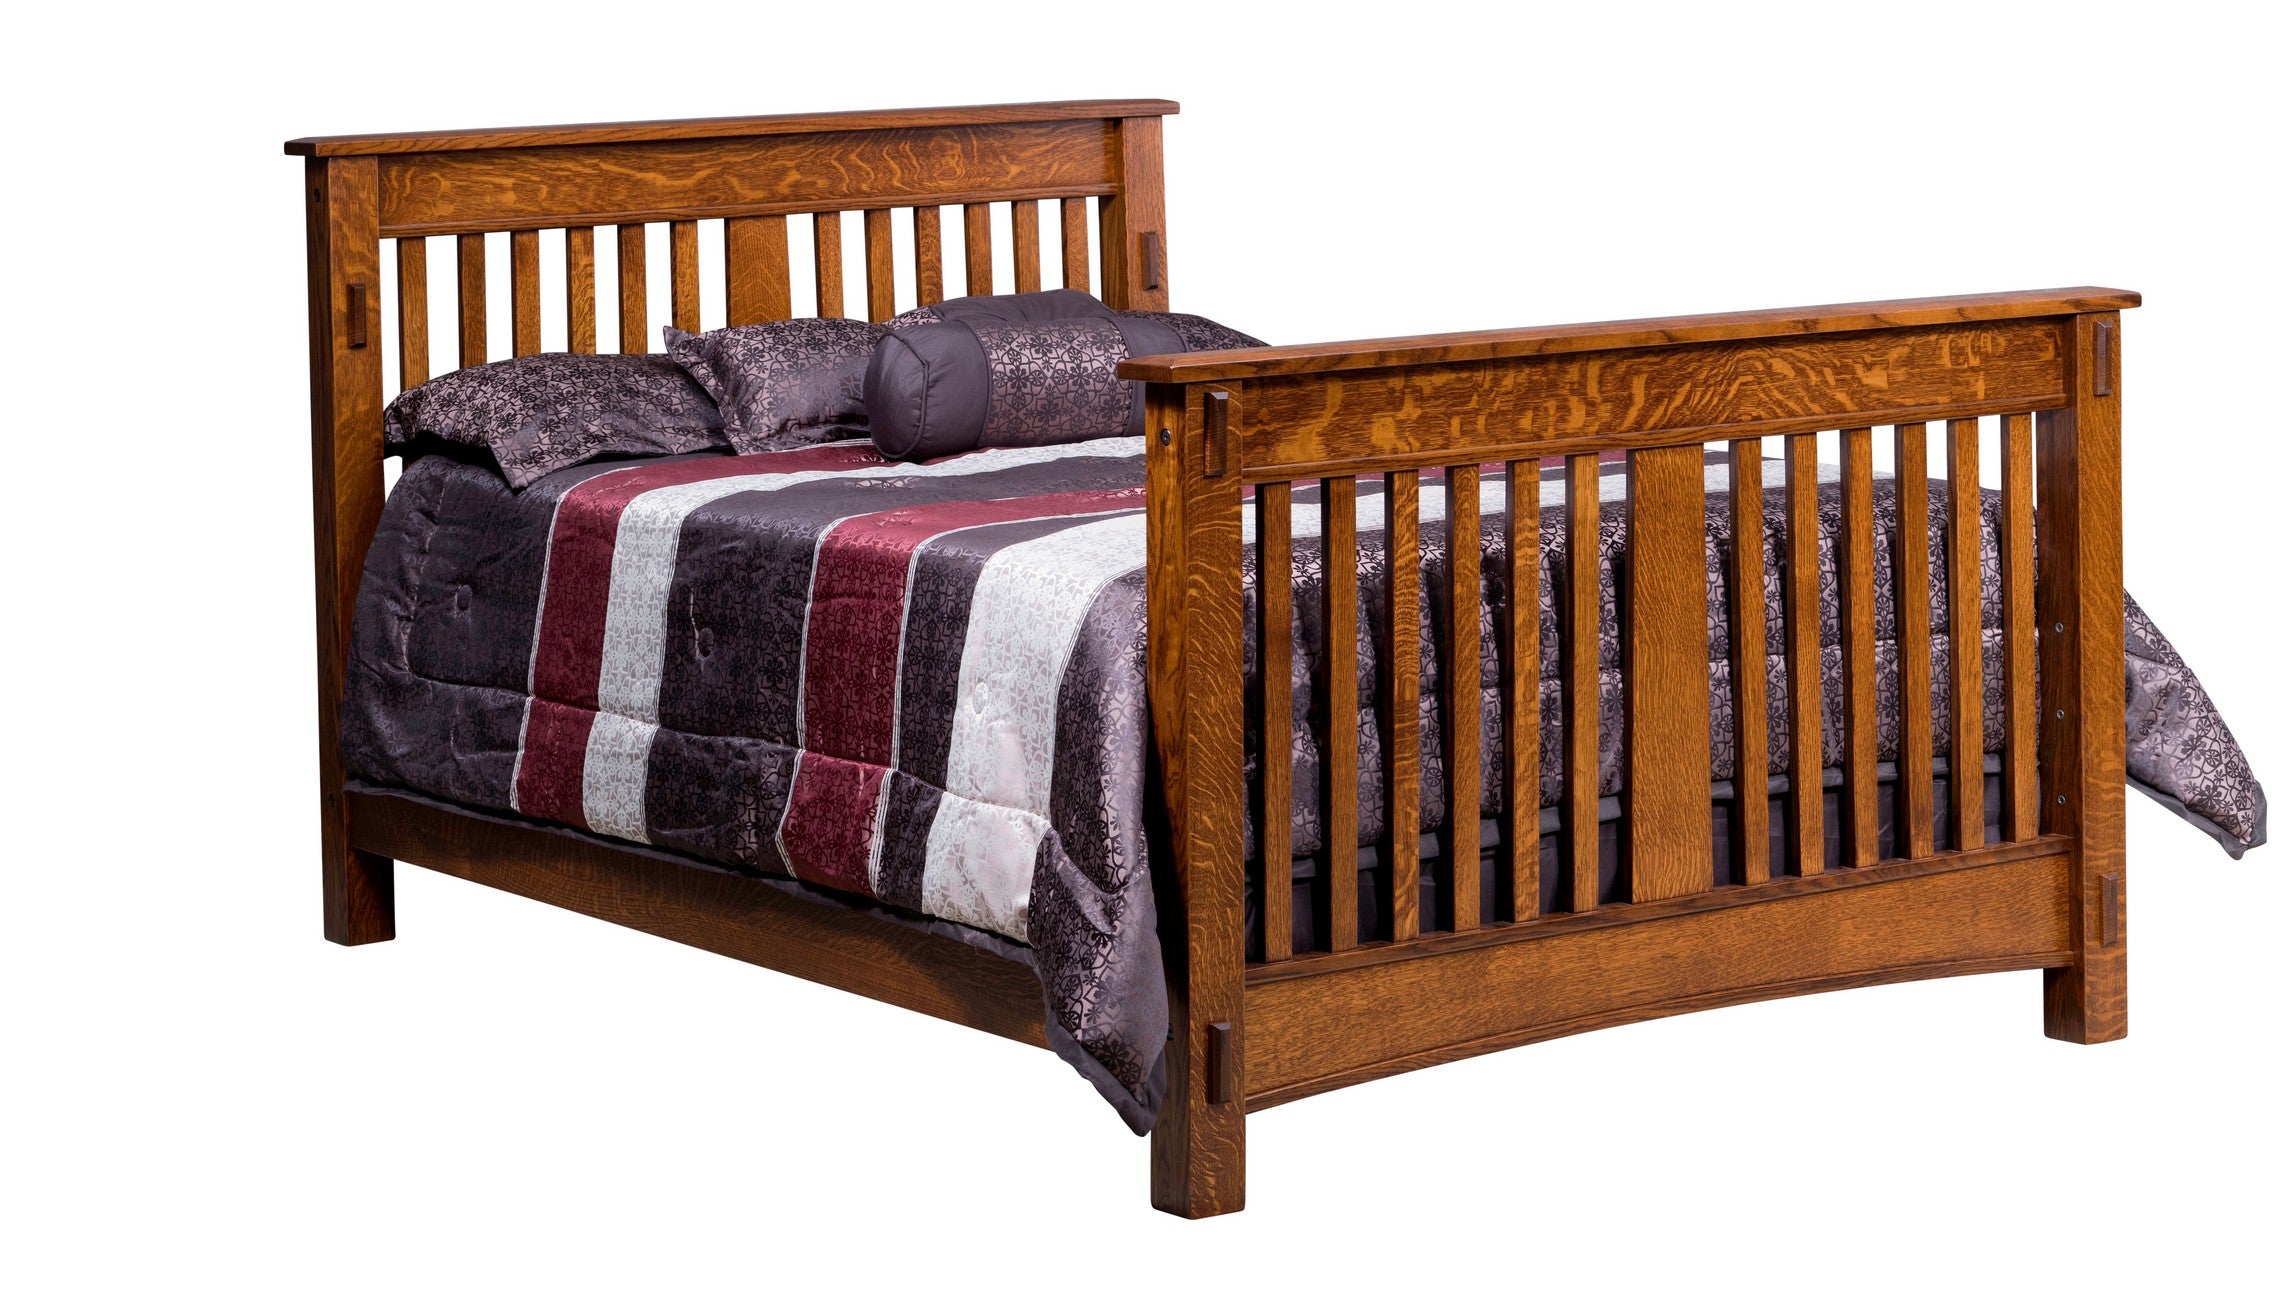 mccoy double bed in quartersawn white oak with golden brown stain